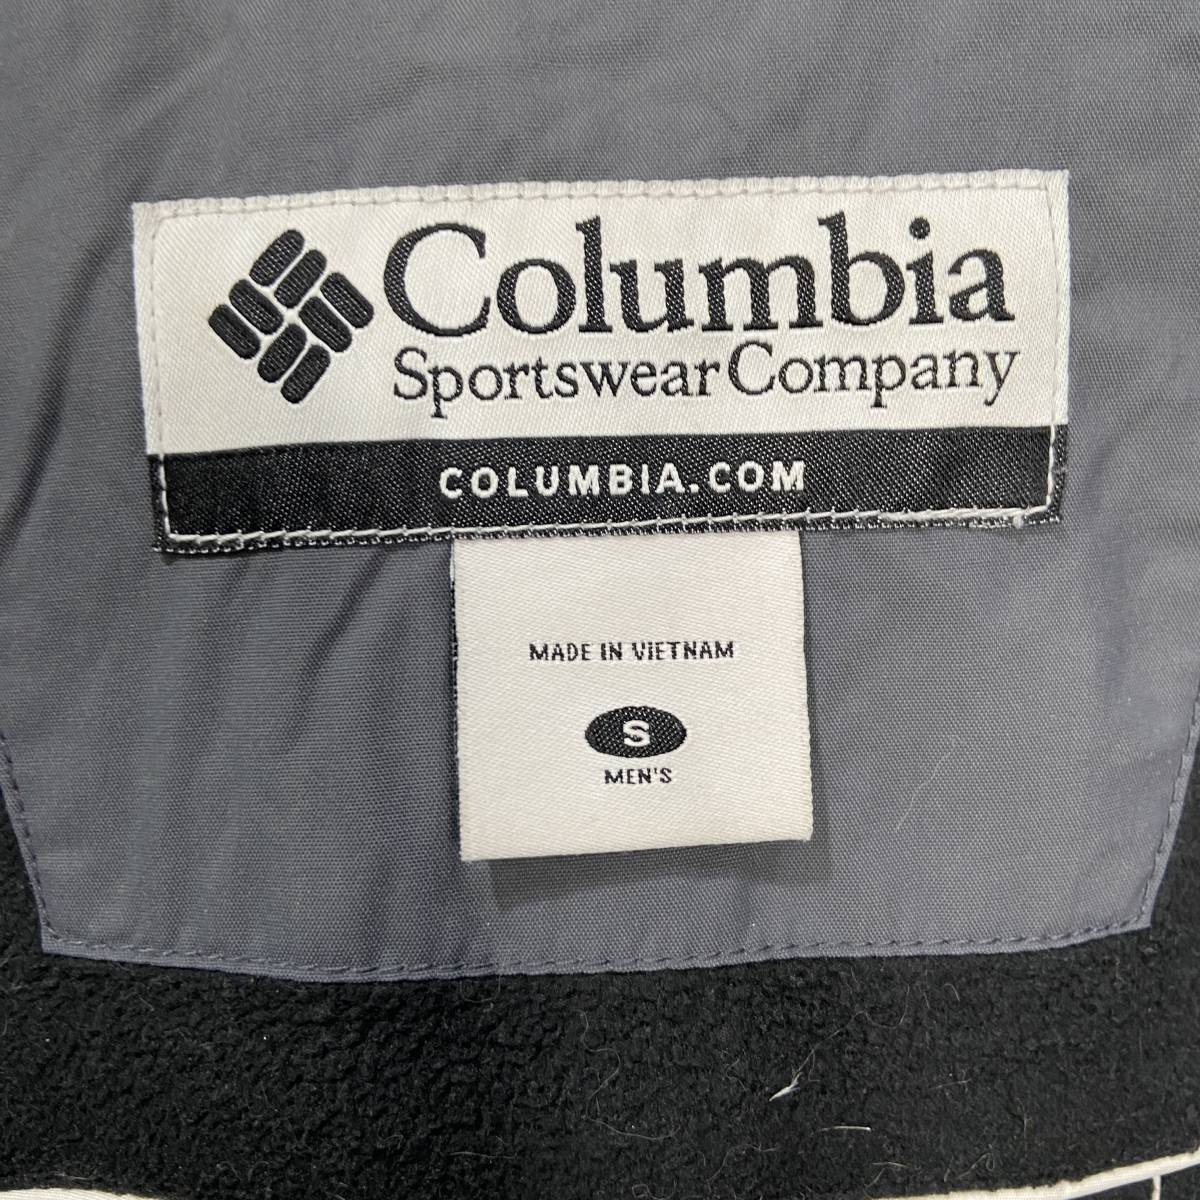  free shipping *Columbia* Colombia * with cotton nylon jacket * mountain parka * outdoor wear * black group *S*G23